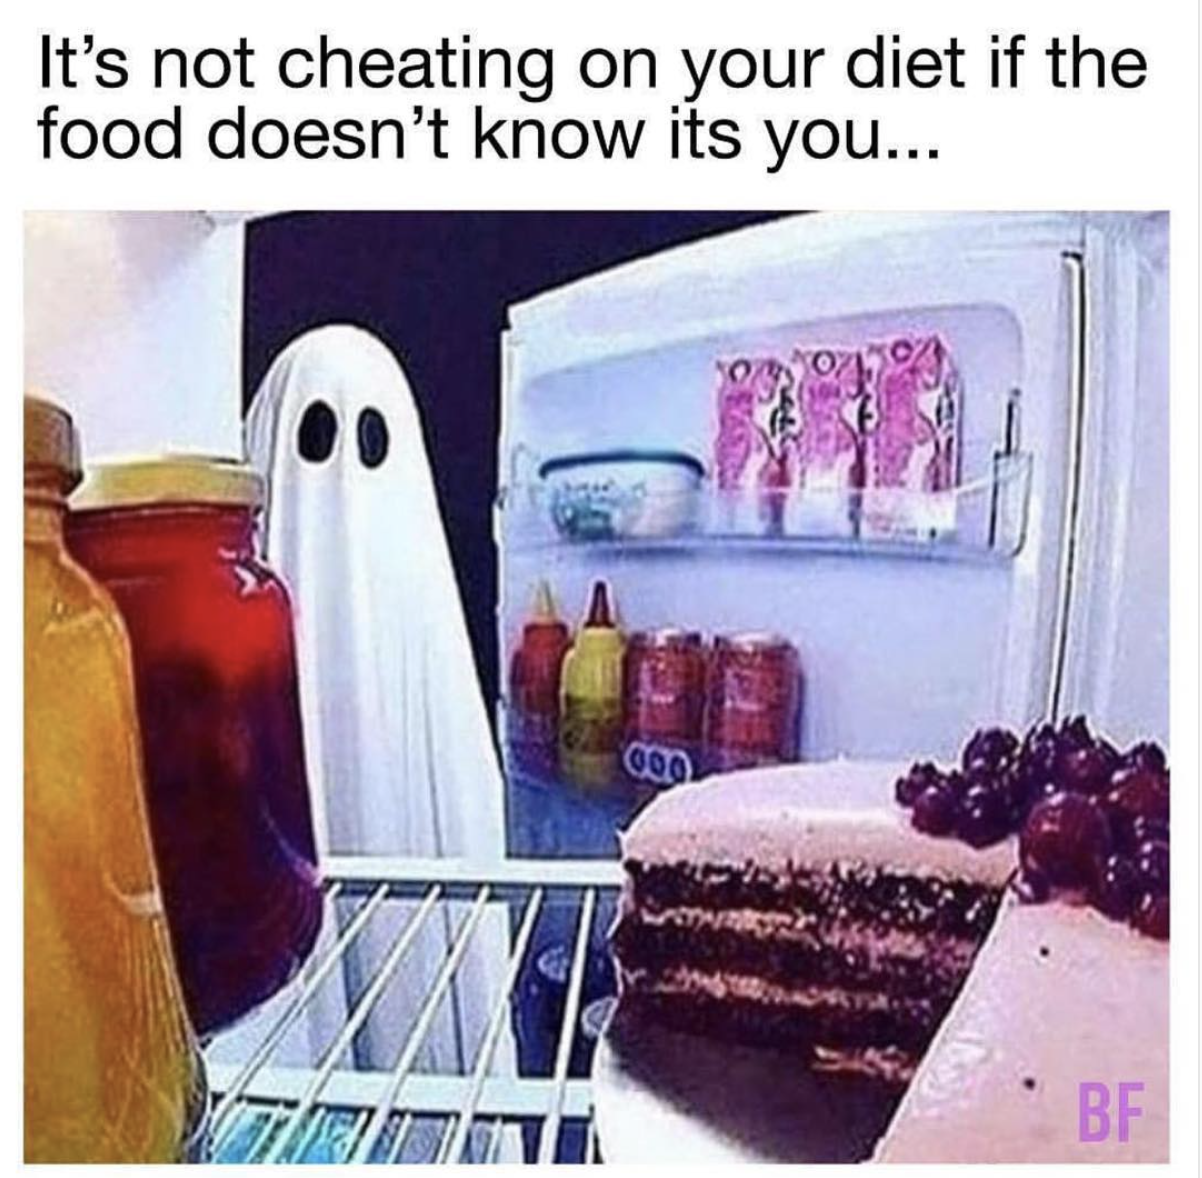 it's not cheating on your diet if - It's not cheating on your diet if the food doesn't know its you... 000 The